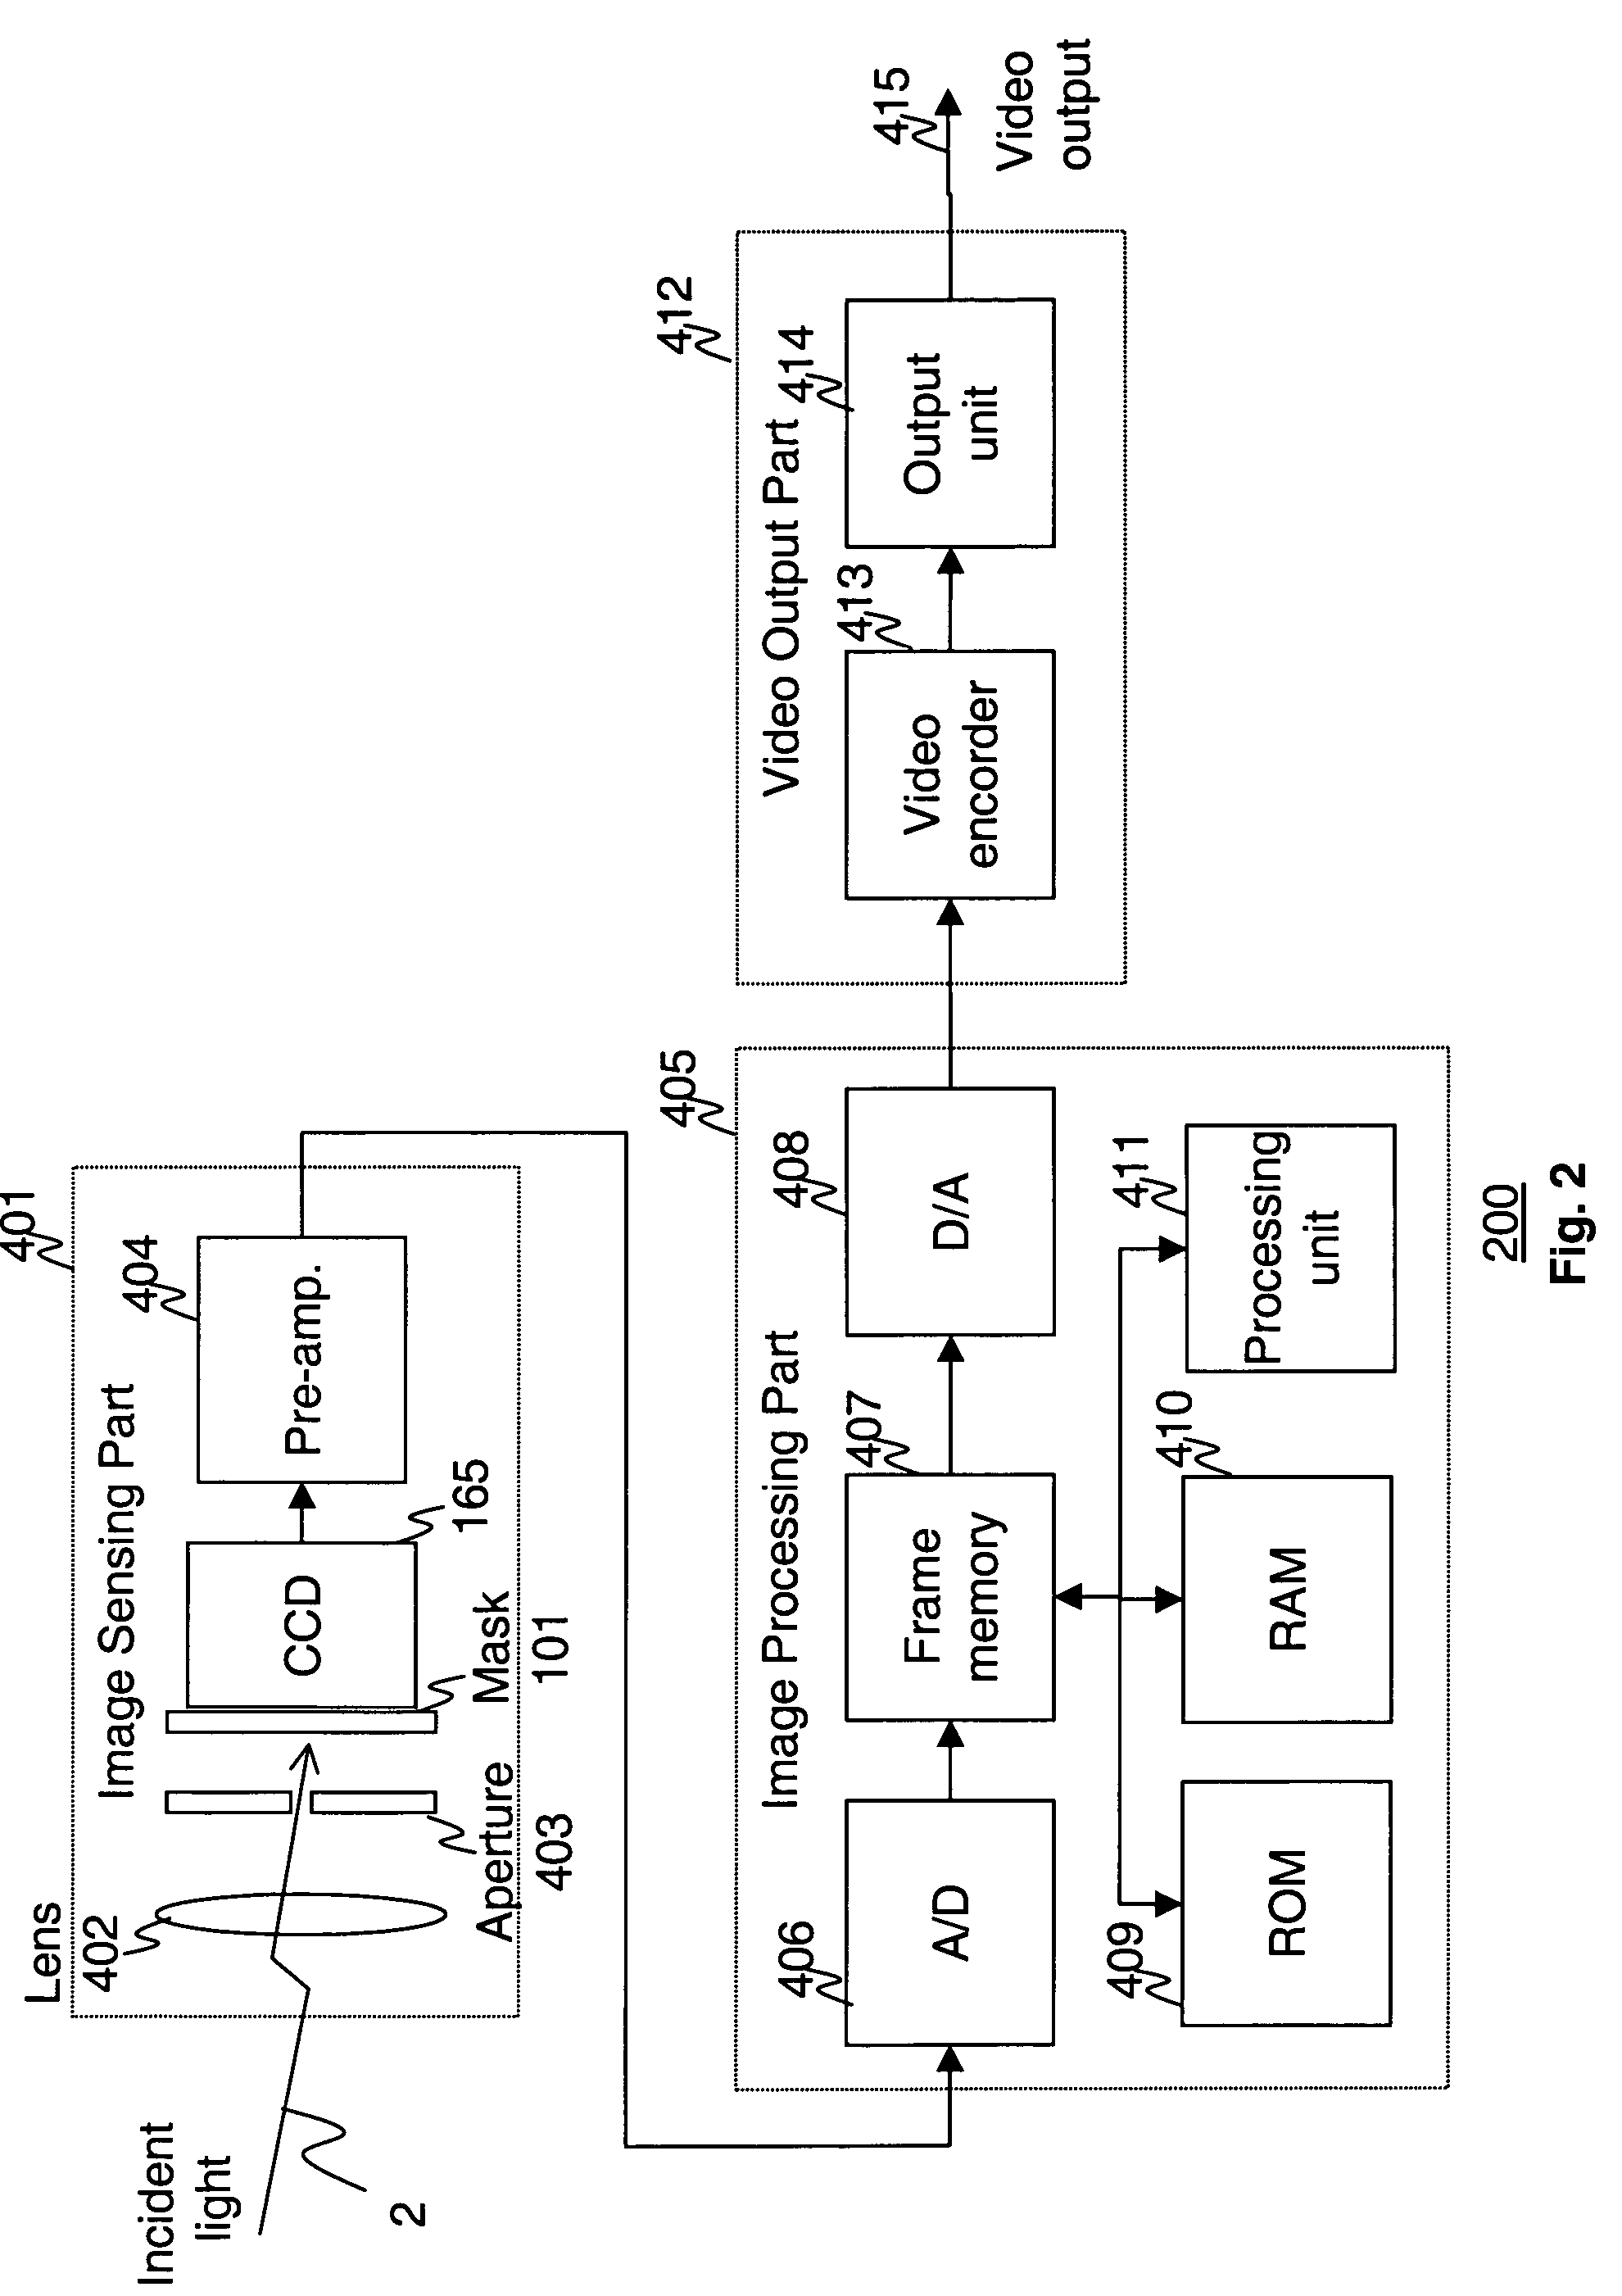 Apparatus and method for high dynamic range imaging using spatially varying exposures